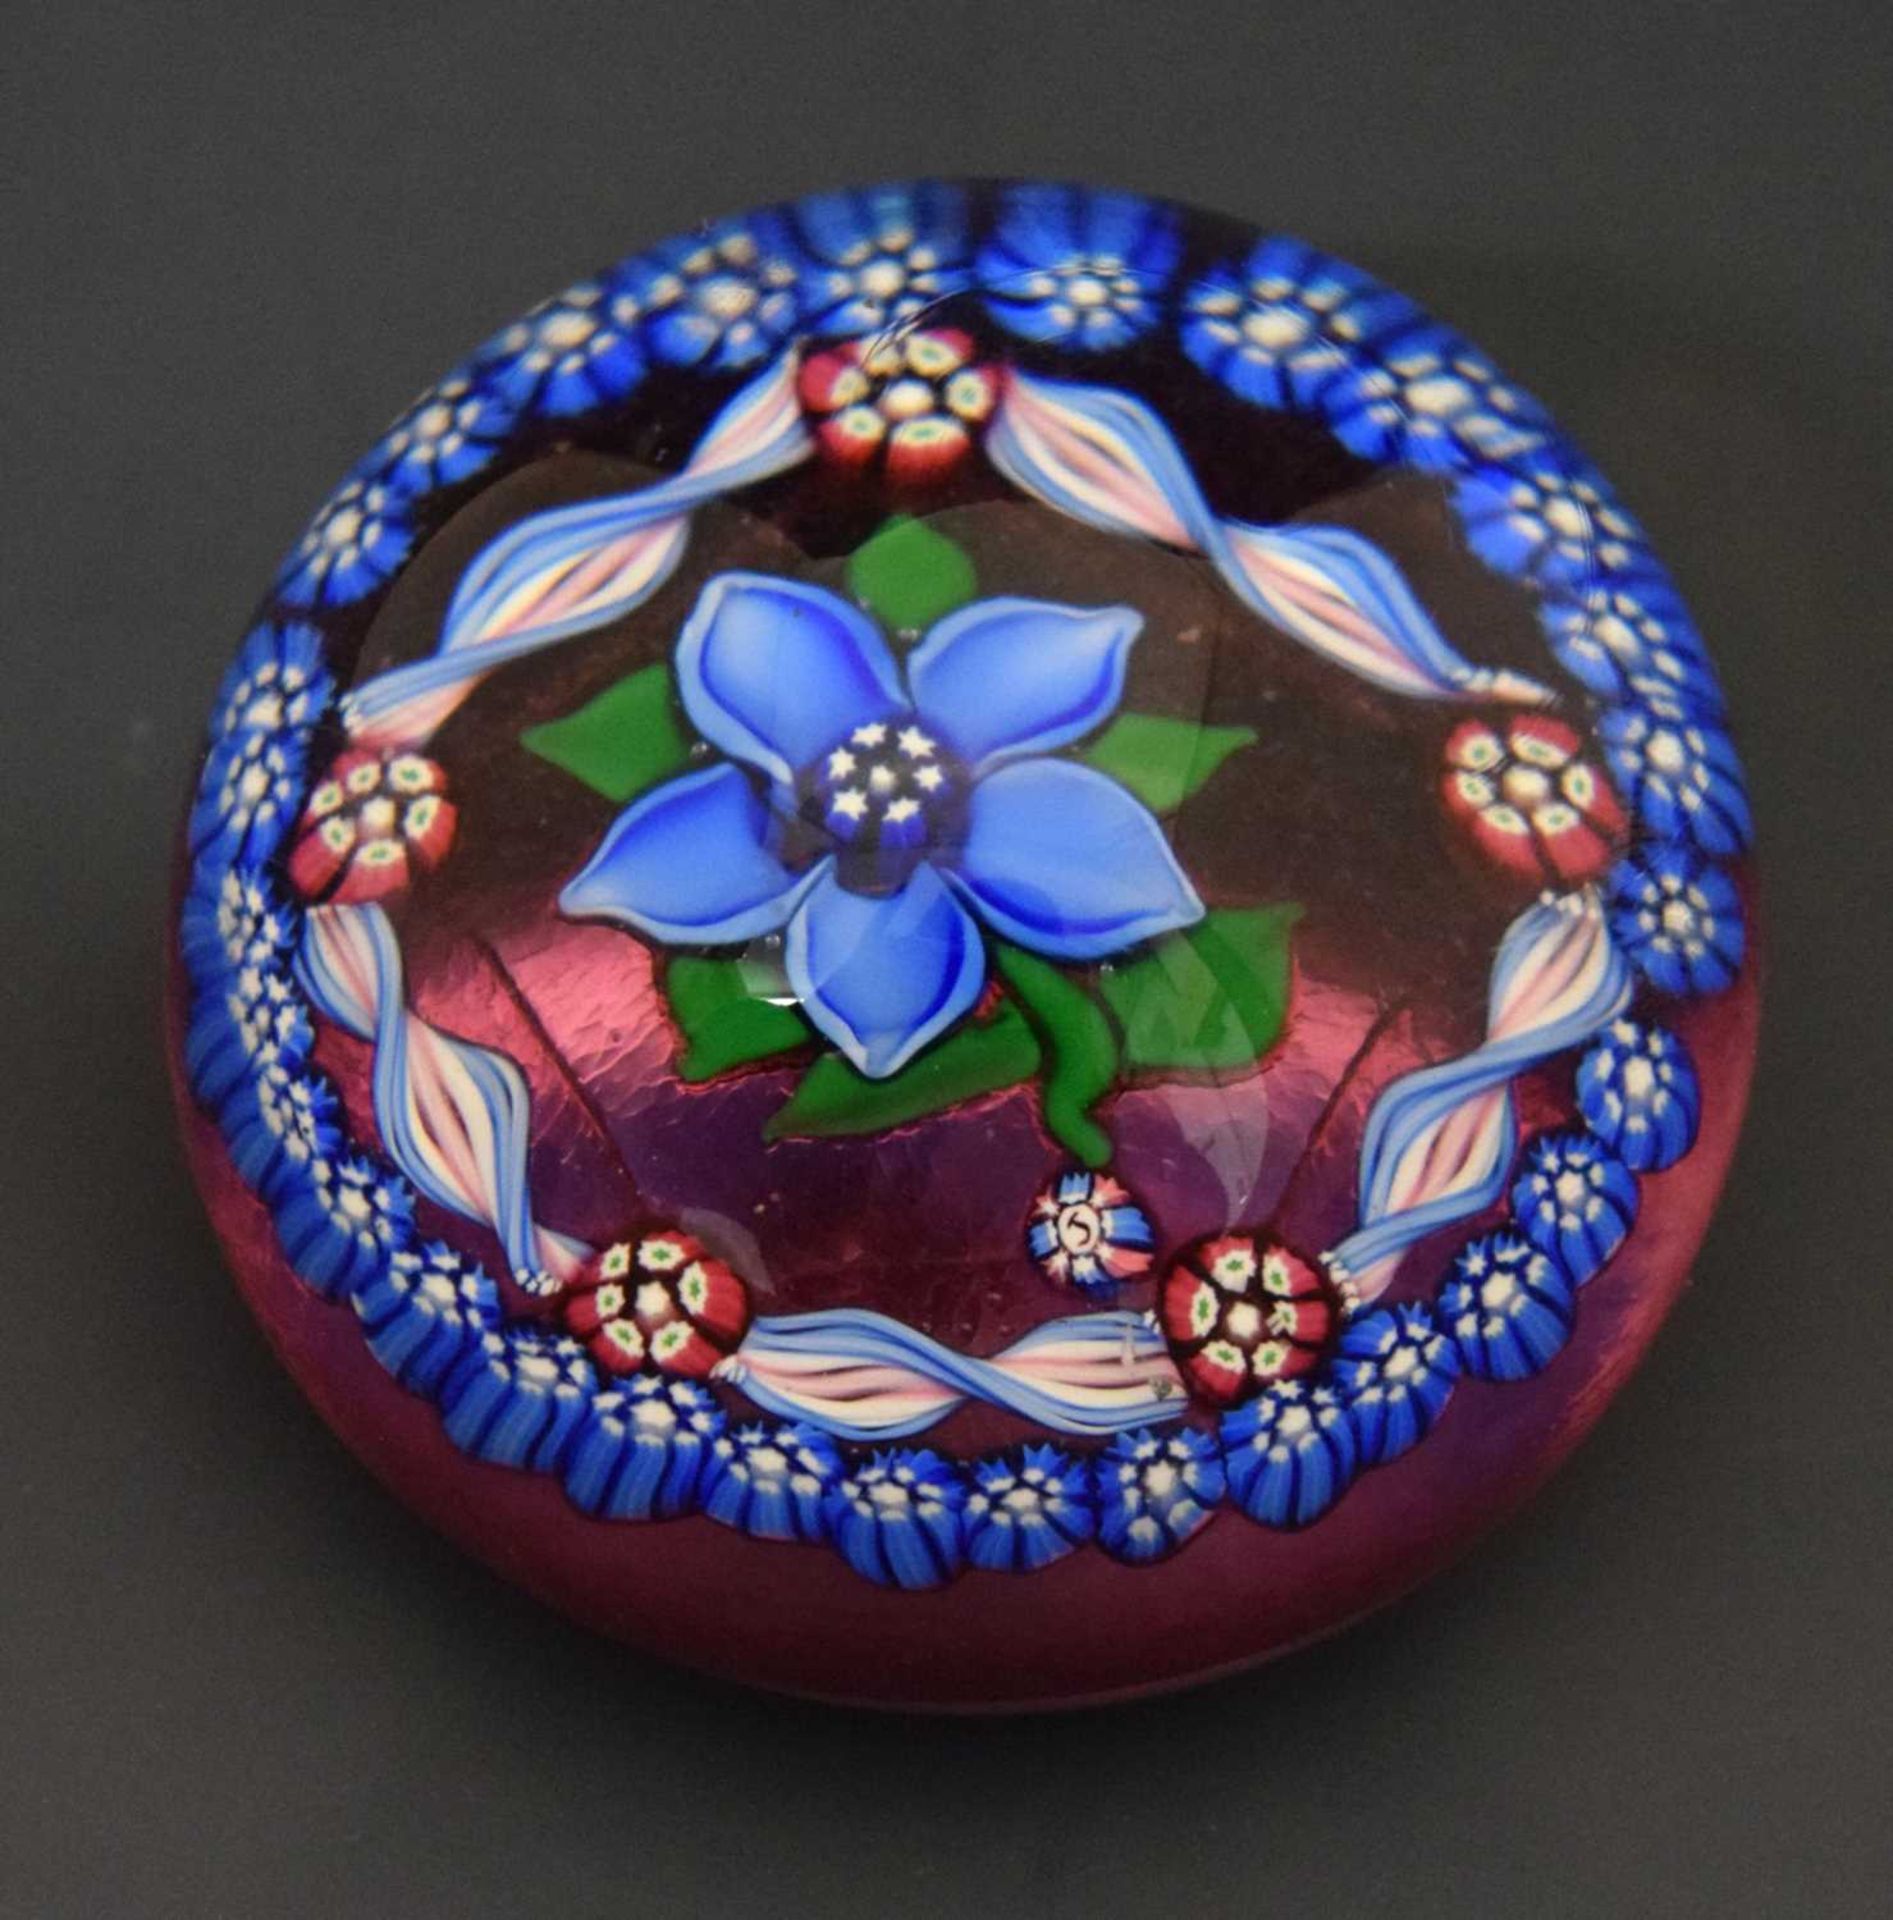 Attributed to Jay Glass - Small glass paperweight